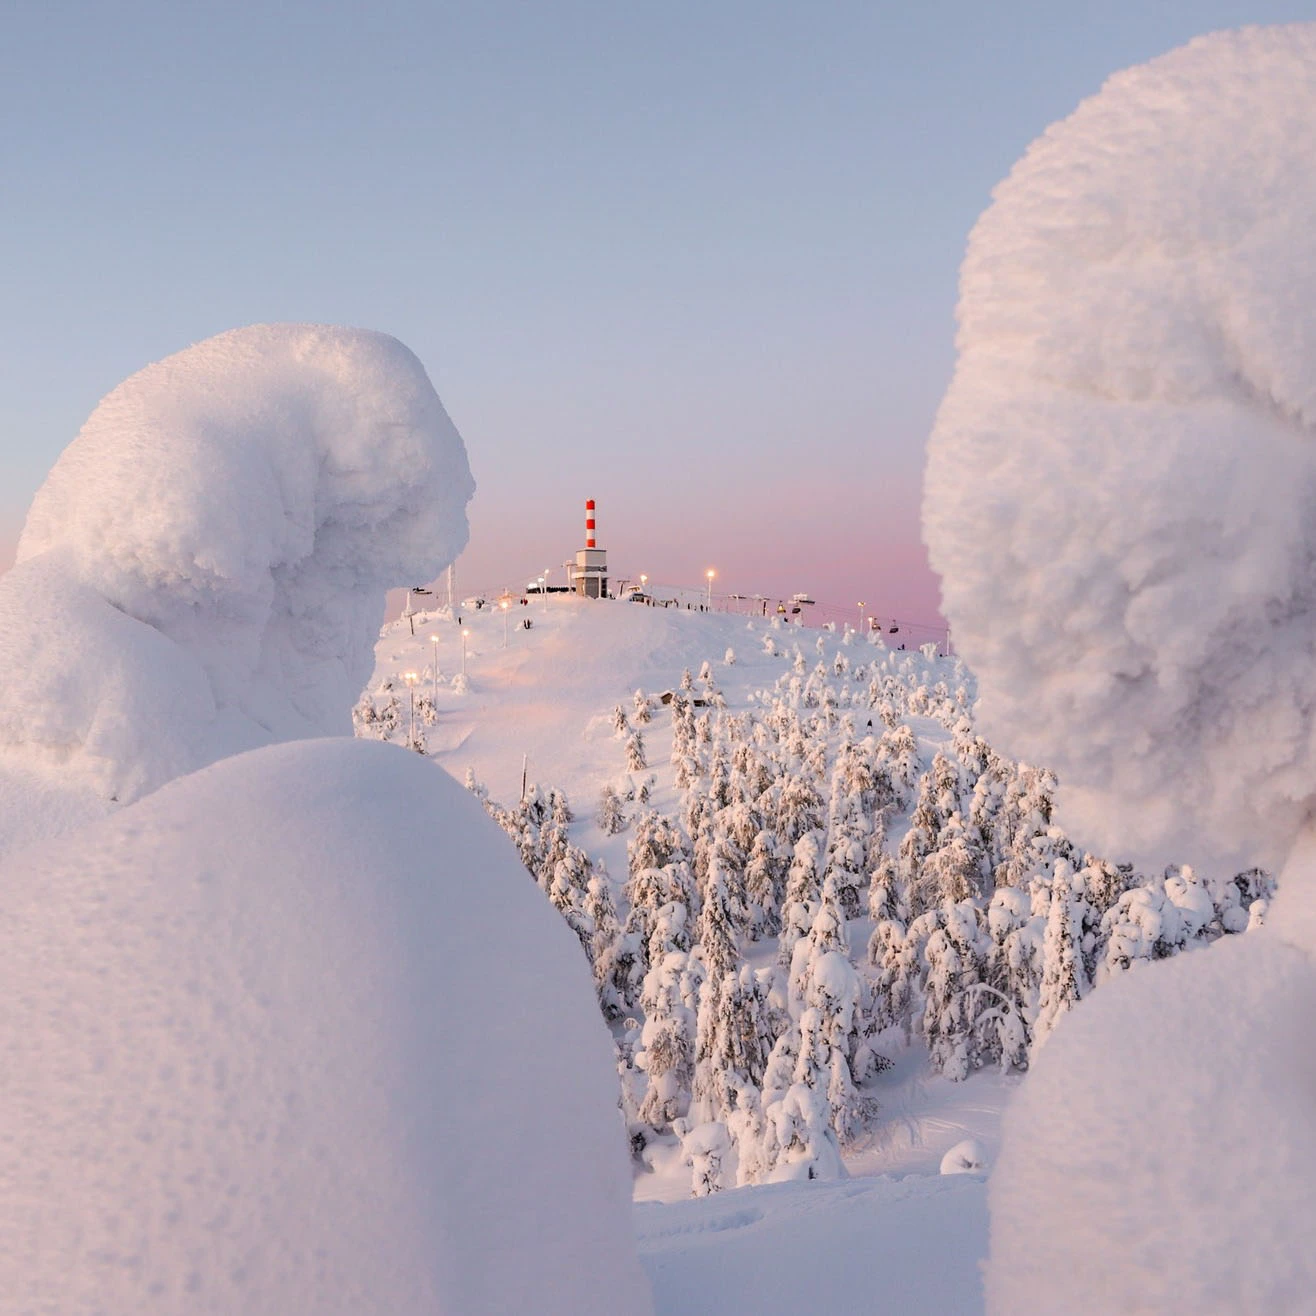 snow monsters in the foreground frame a red and white striped tower at the top of a chairlift on the next mountain top, with a pastel pink sky